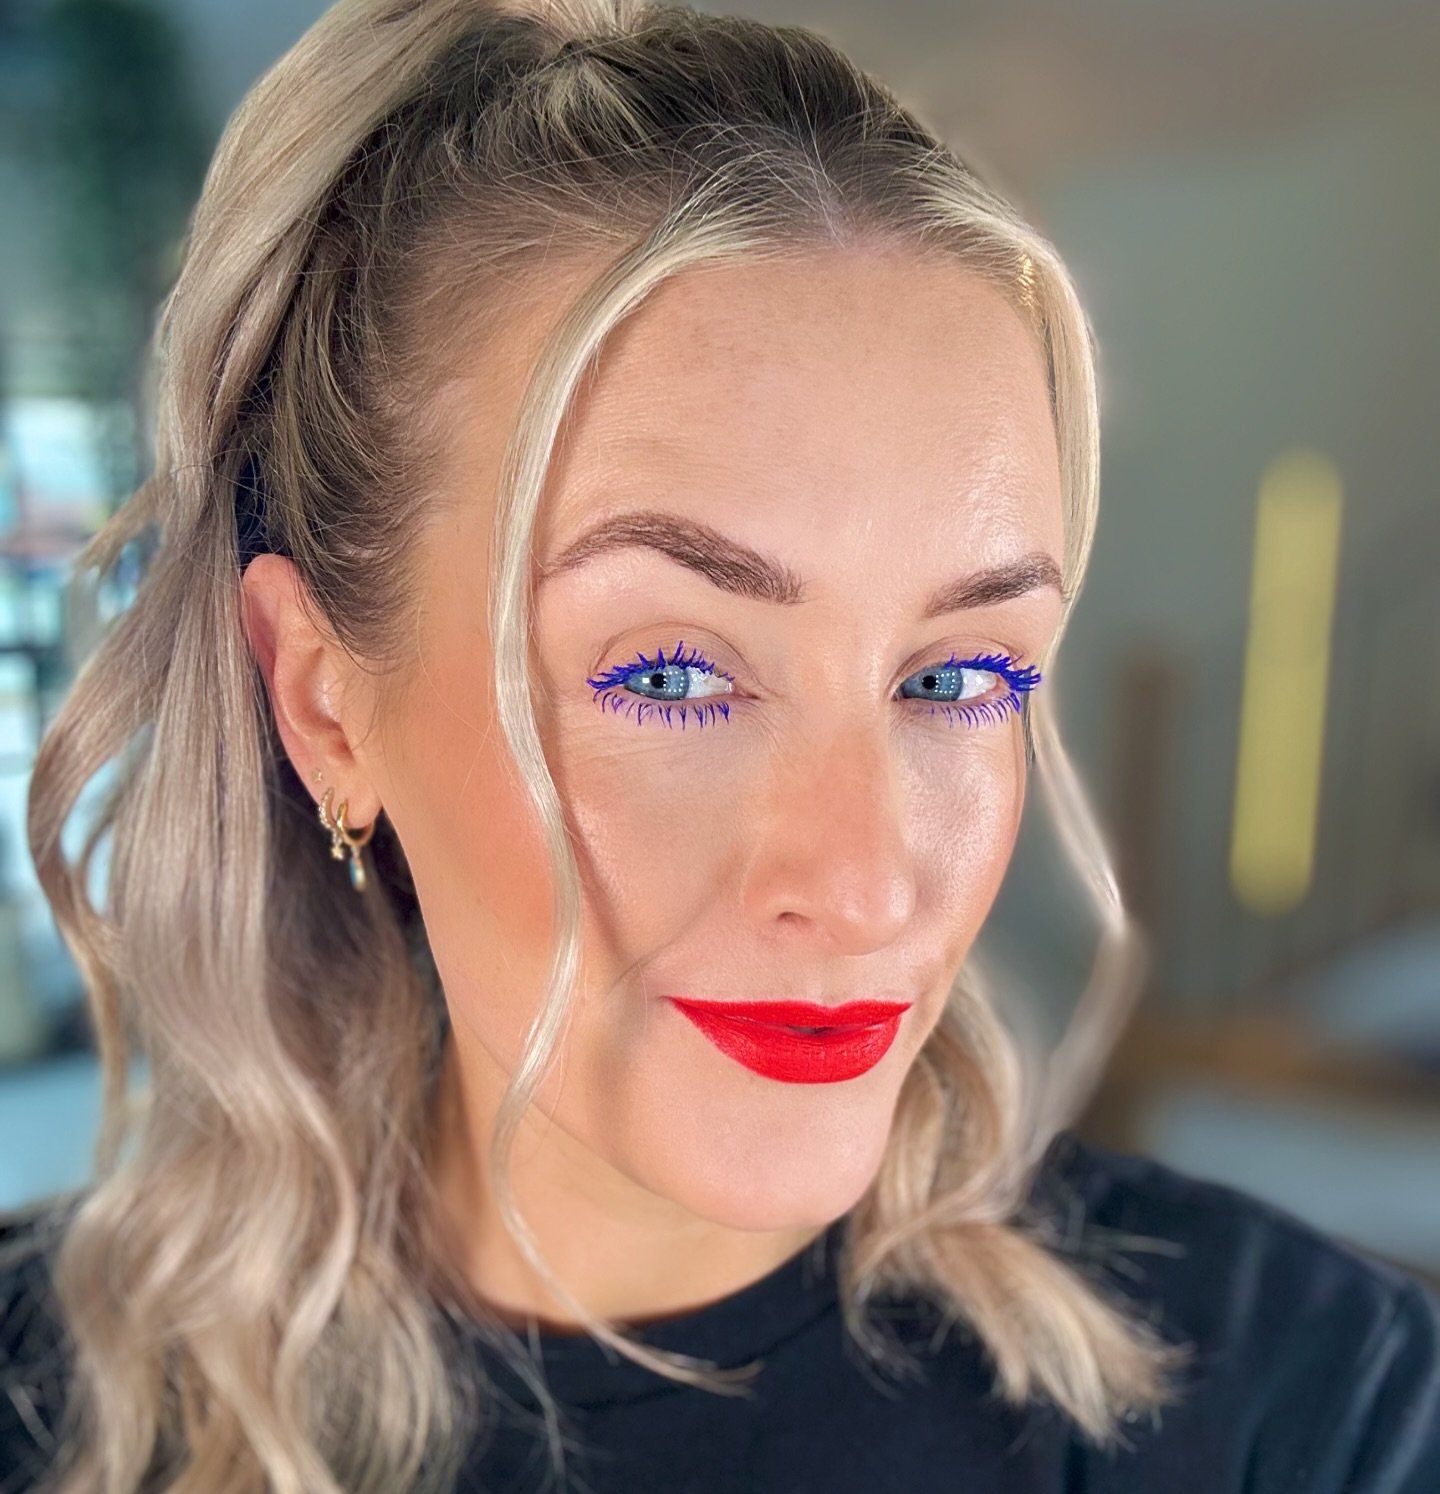 Gal has gone ROGUE!!! 🤣🩵🧨 Following on from yesterday&rsquo;s blue mascara stories. We now have an orange-red lip in the mix. 🤣🧨 TODAY this can be your sign to break the rules, try something new, and go a bit wild!!! Also&hellip;.

When people s